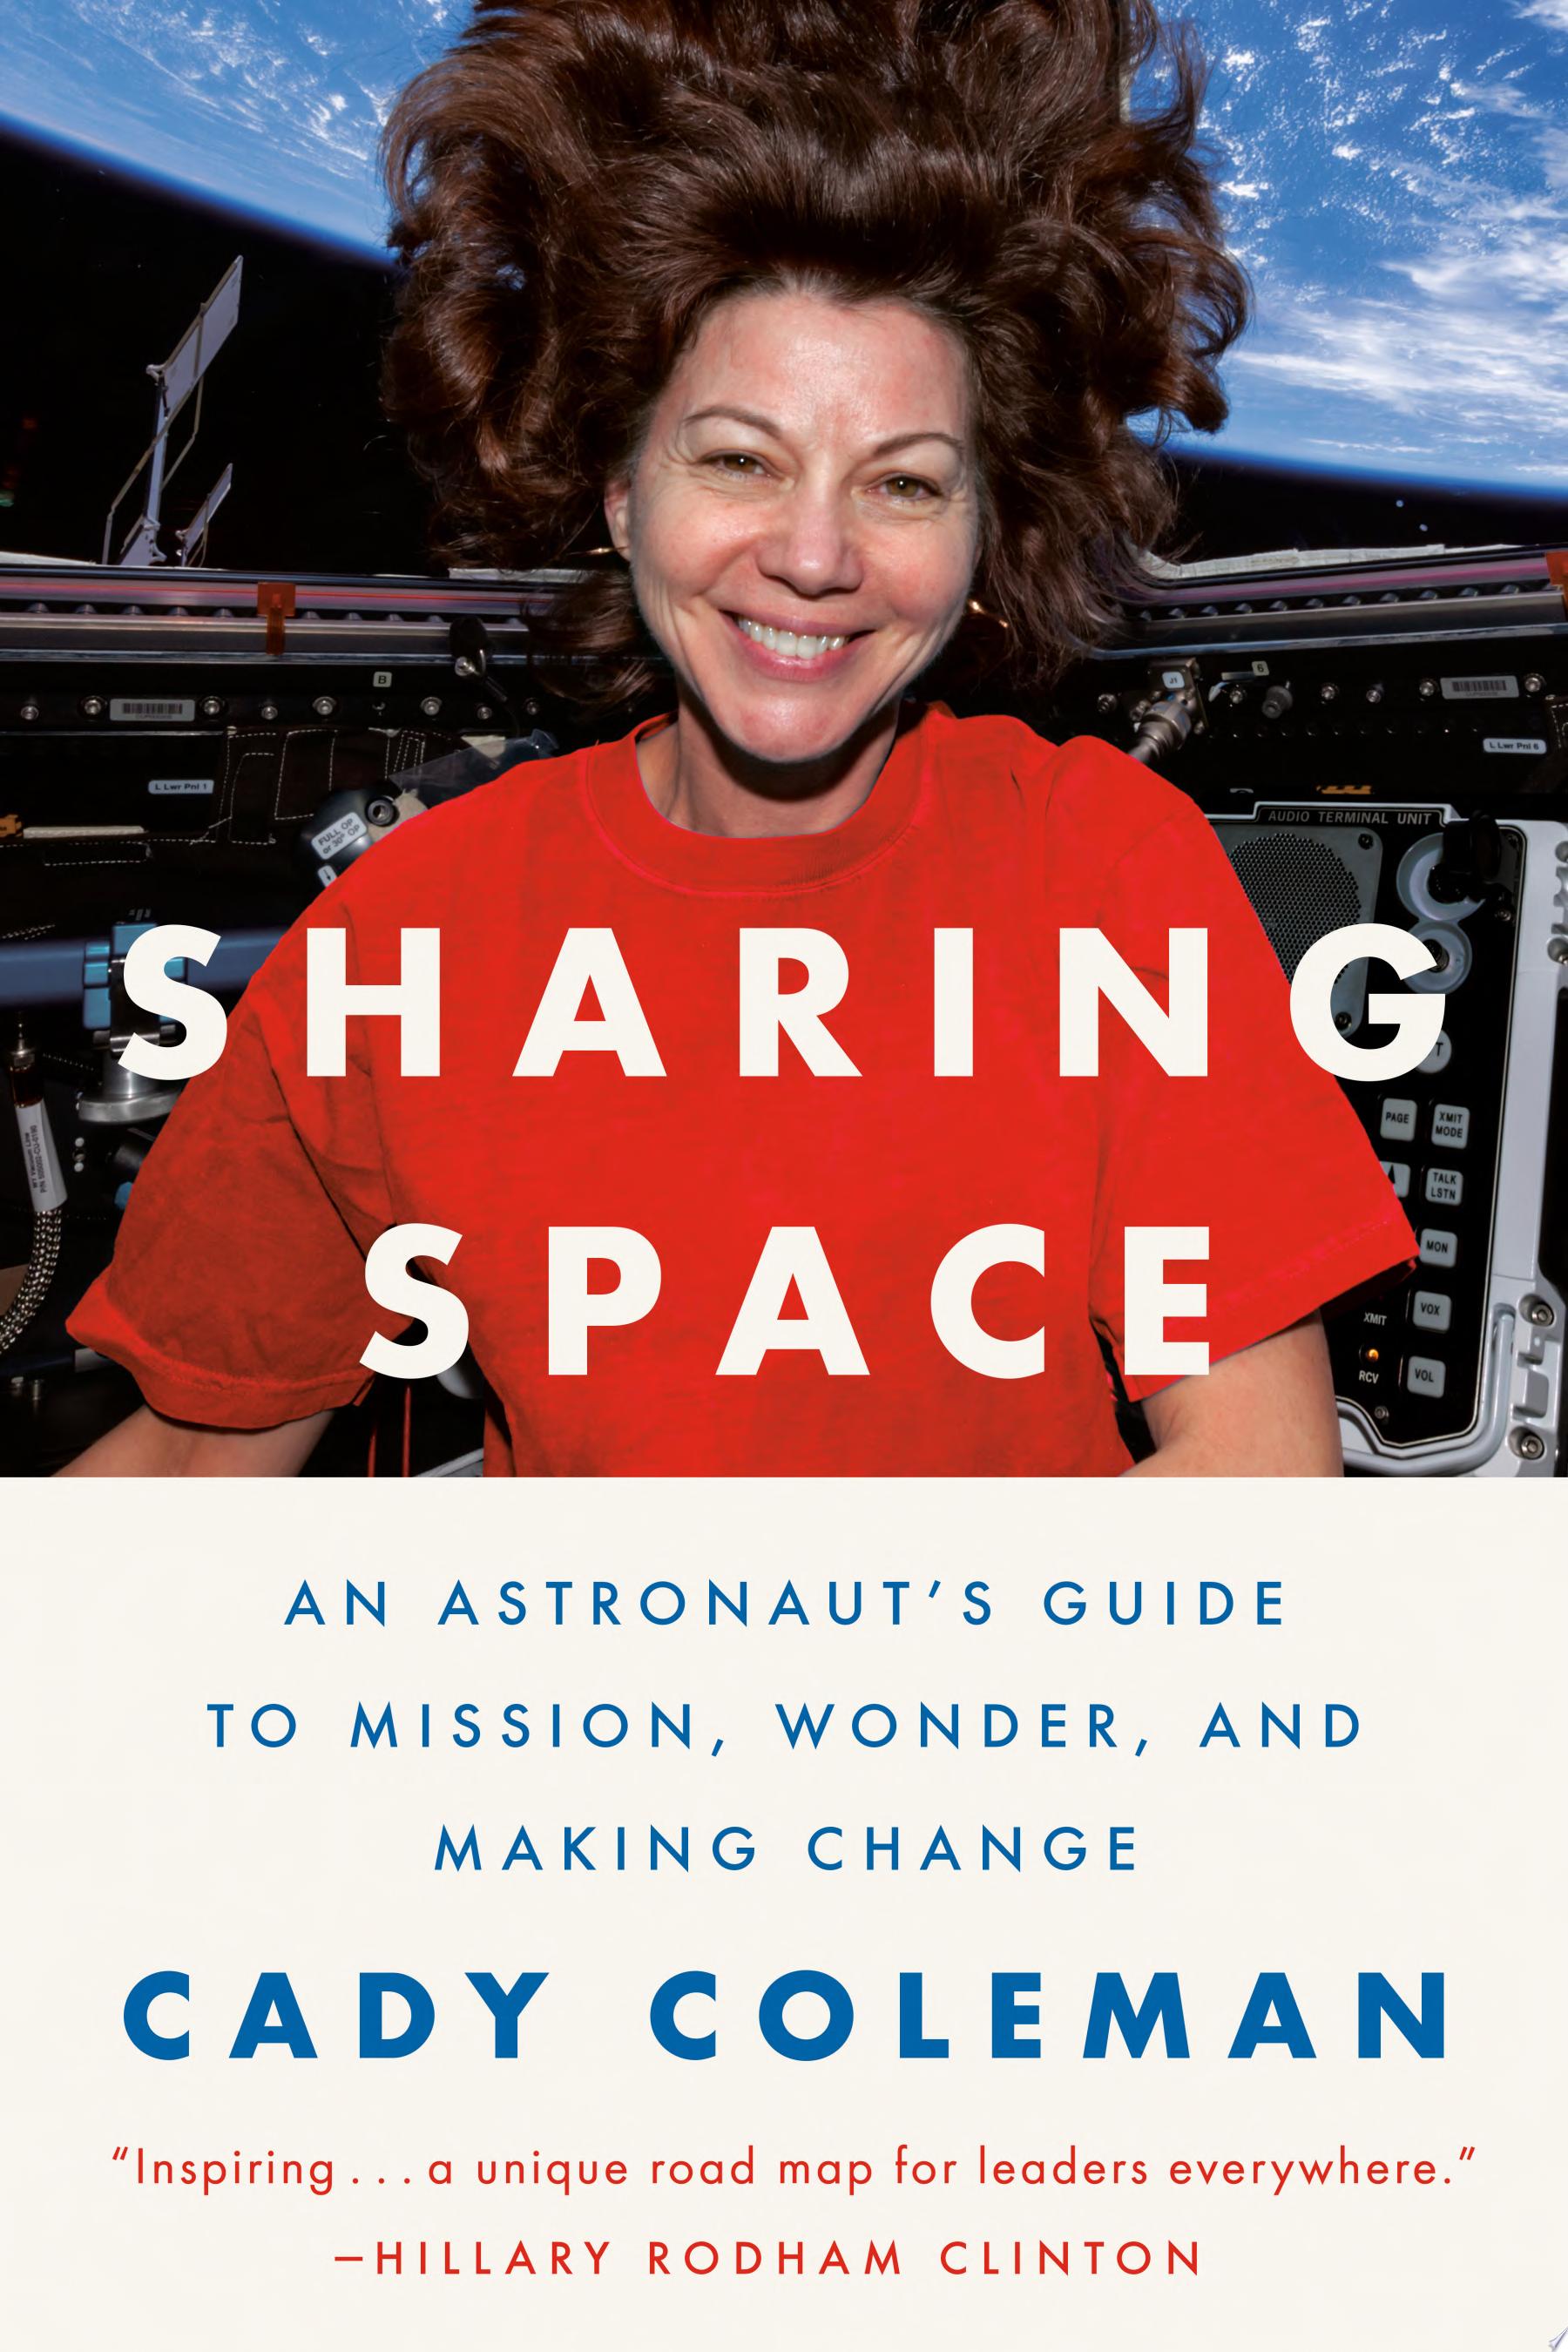 Image for "Sharing Space"